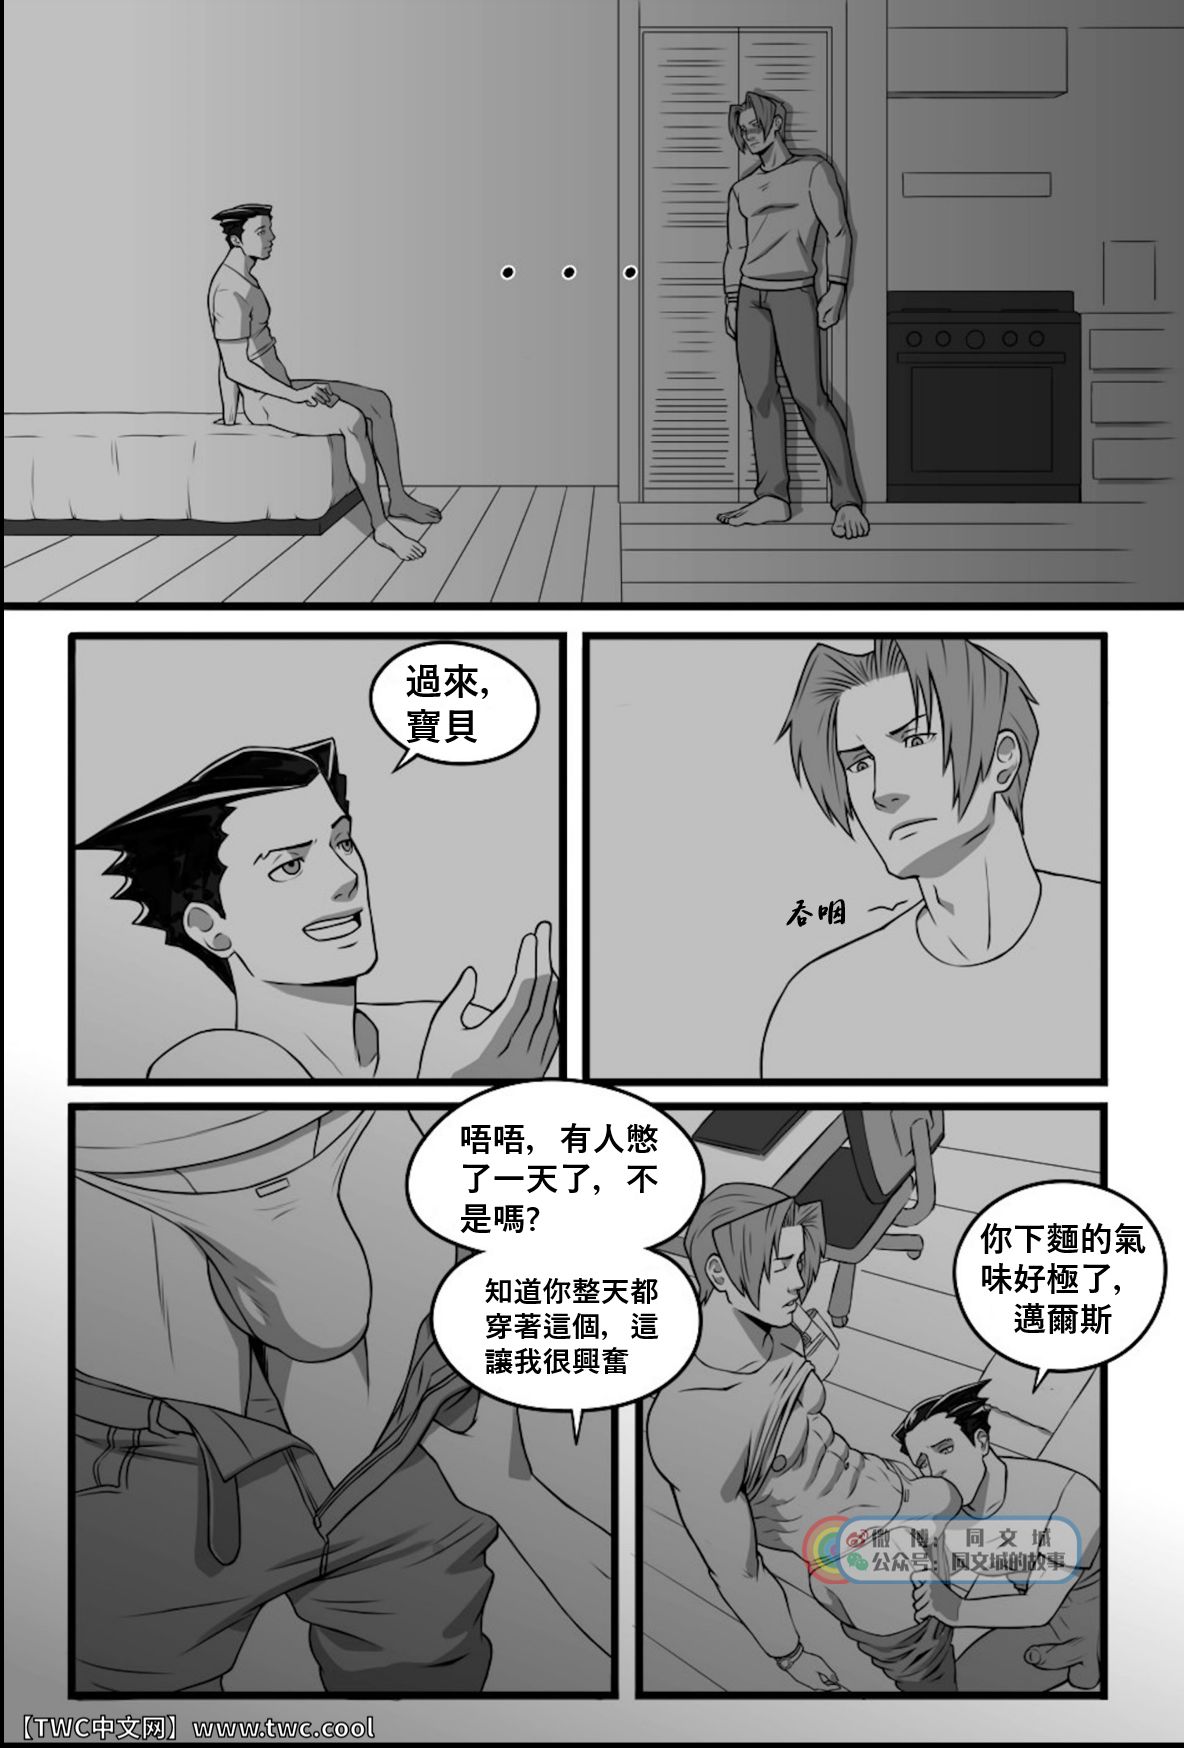 [Lupin Barnabi] Ace Attorney_ We've been doing this tango for years [Chinese] [中国翻訳] [同文城] [Lupin Barnabi] Ace Attorney_ We've been doing this tango for years [Chinese] [中国翻訳] [同文城]